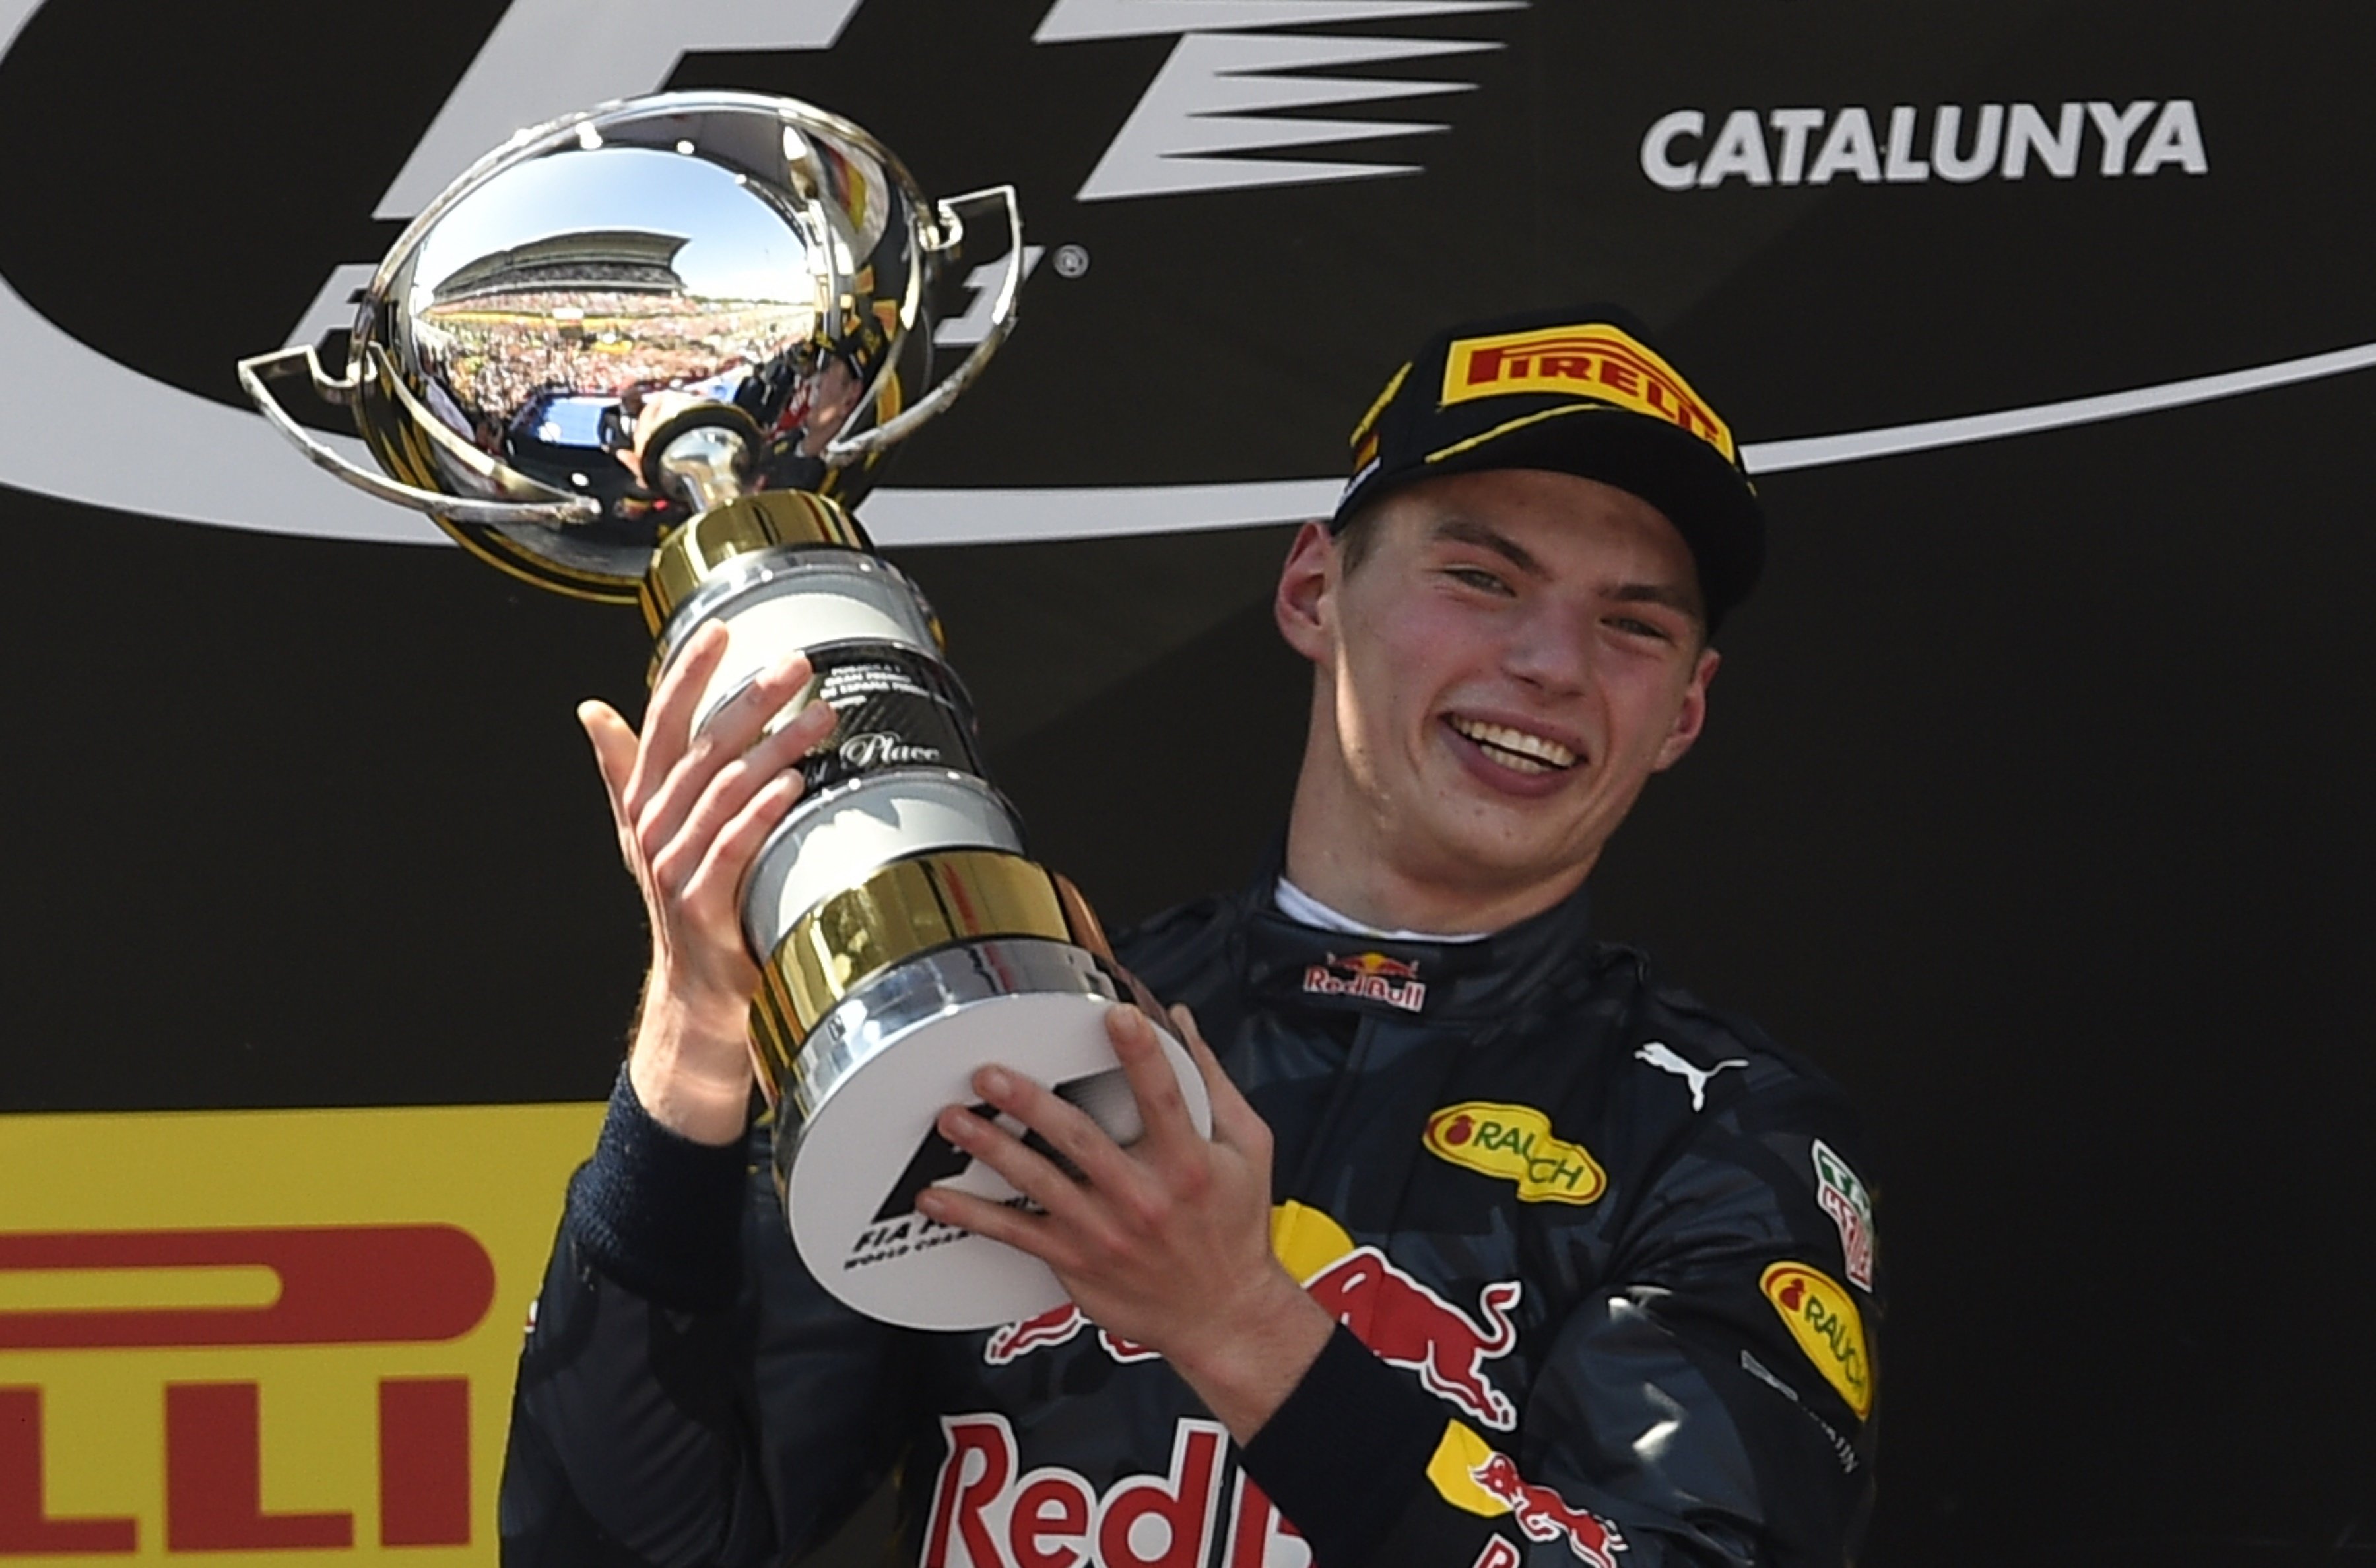 Max Verstappen becomes youngest ever Formula One - YP | South China Morning Post